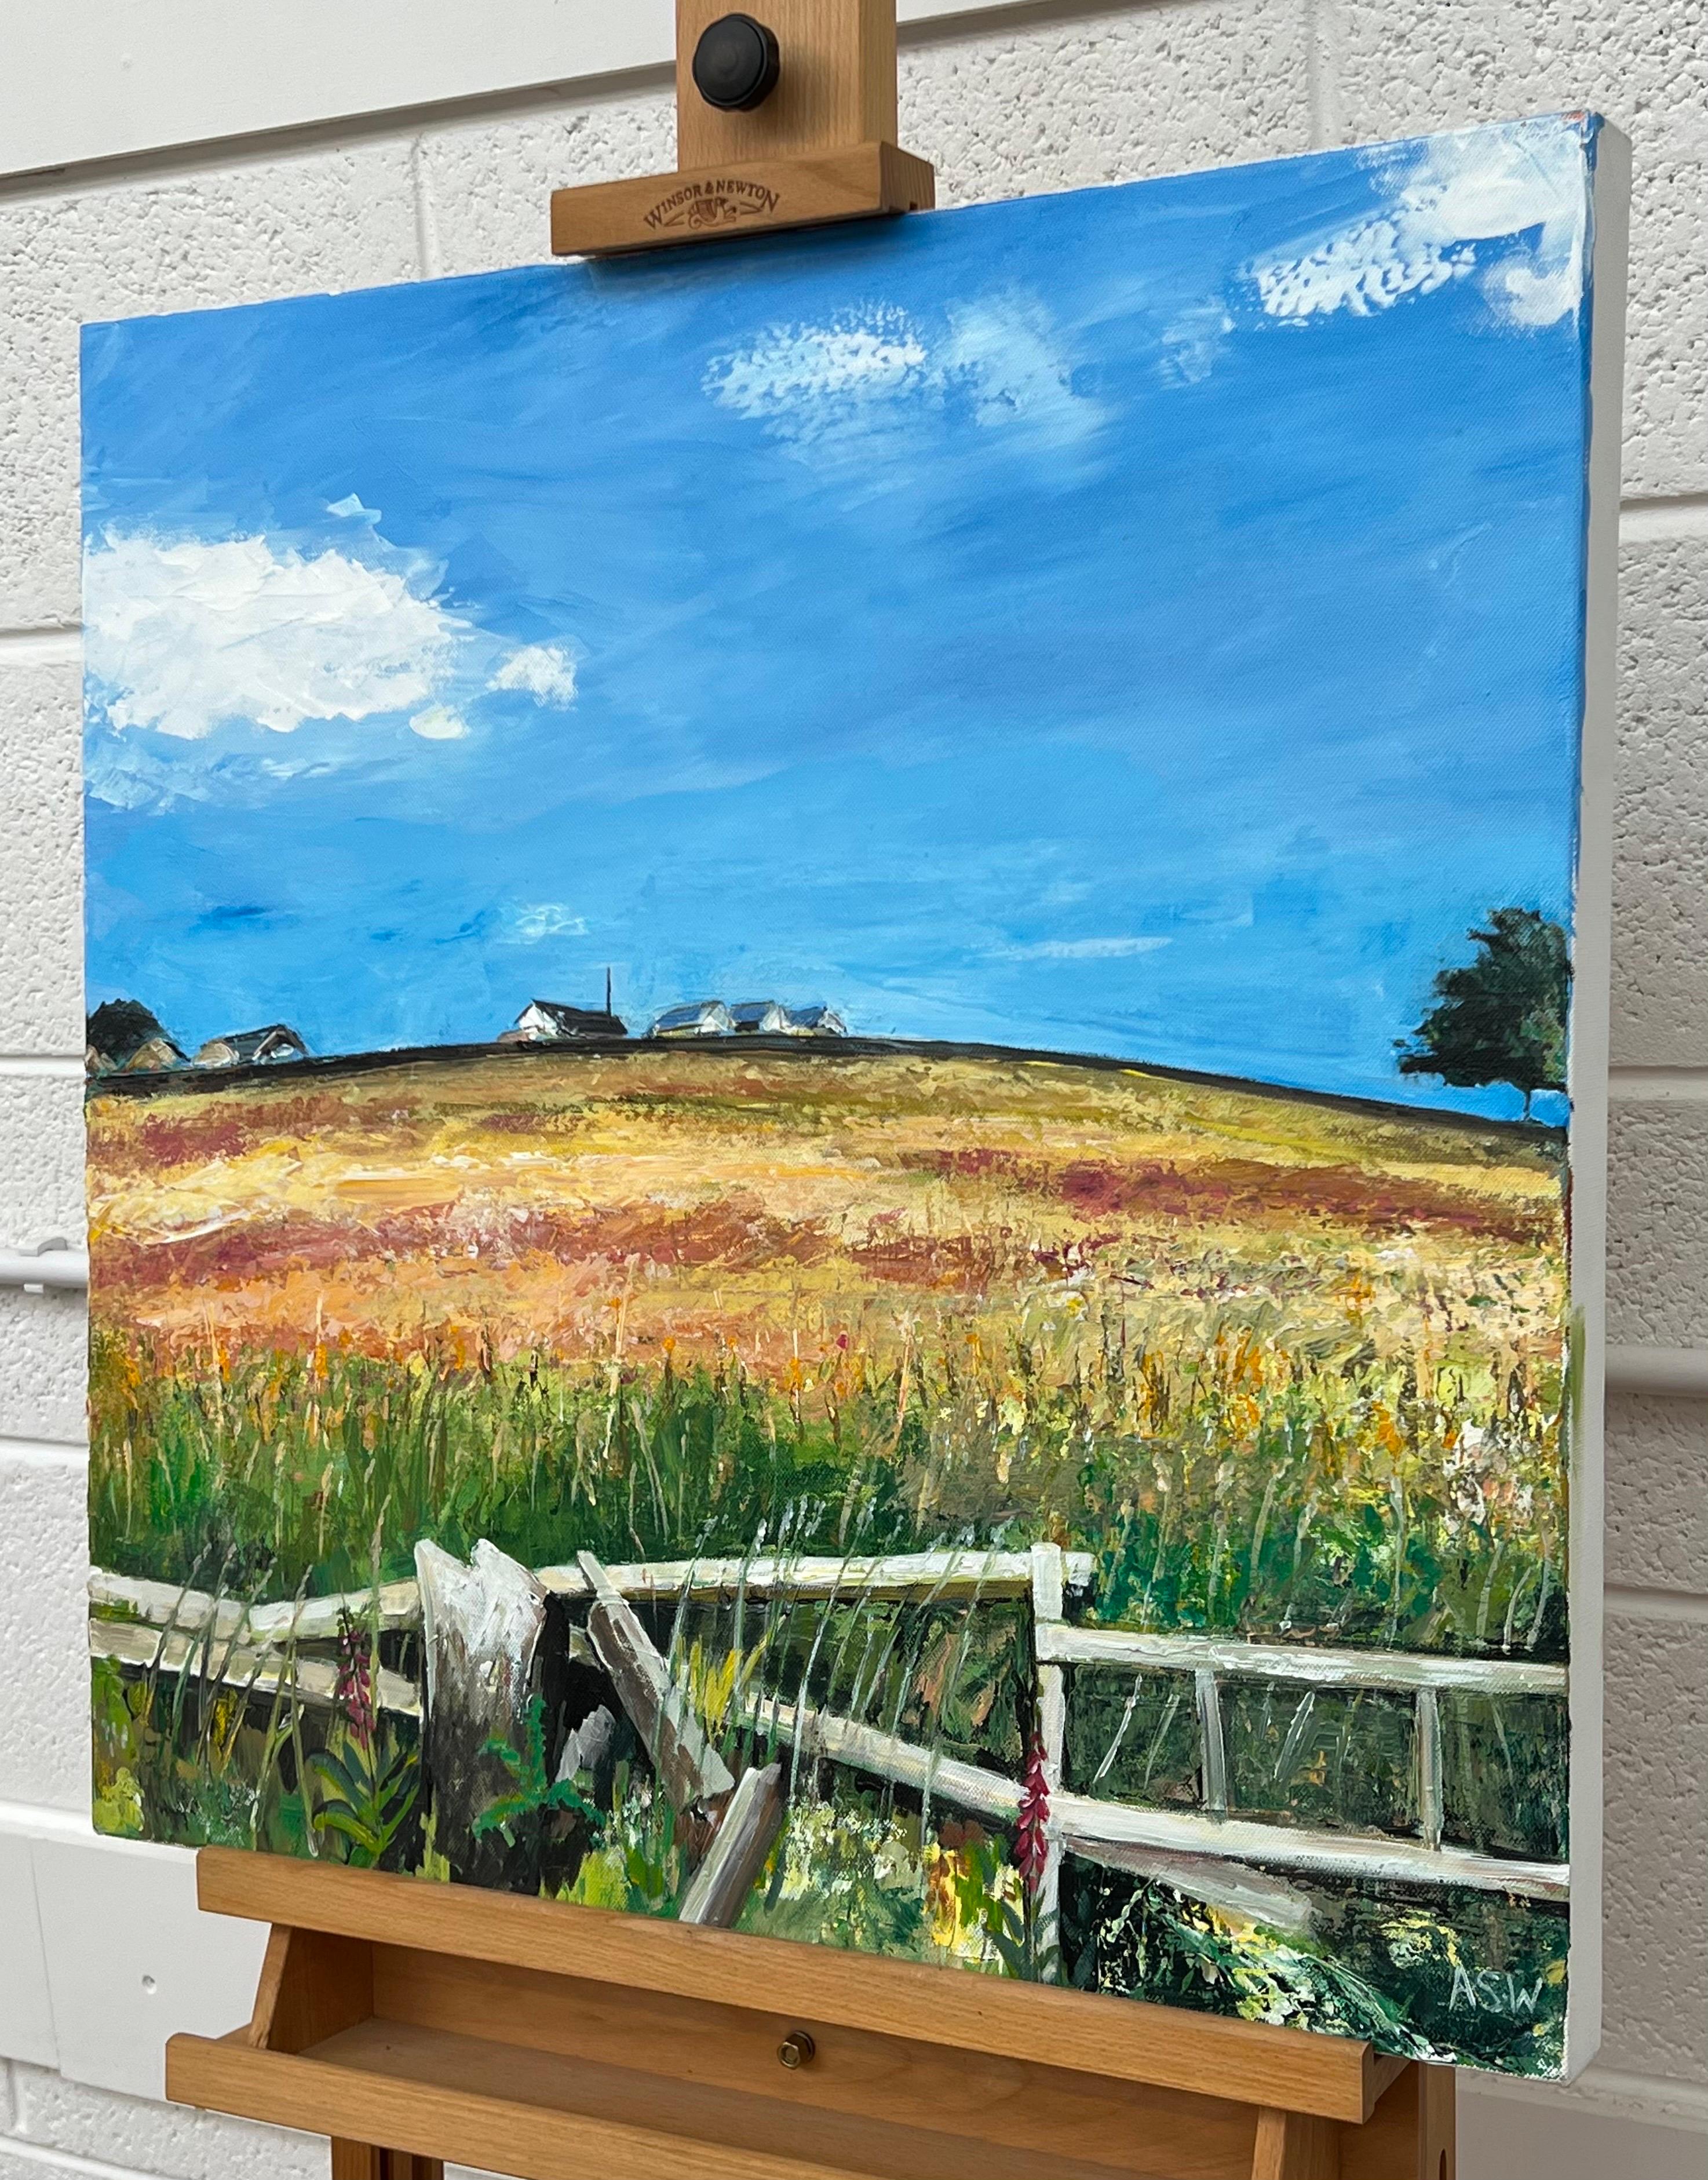 Painting of Lancashire Fields in the English Countryside by British Landscape Artist, Angela Wakefield. Peering over a dry stone wall through the long grass, wild flowers, across a field towards farm buildings and barns.  

Art measures 24 x 24